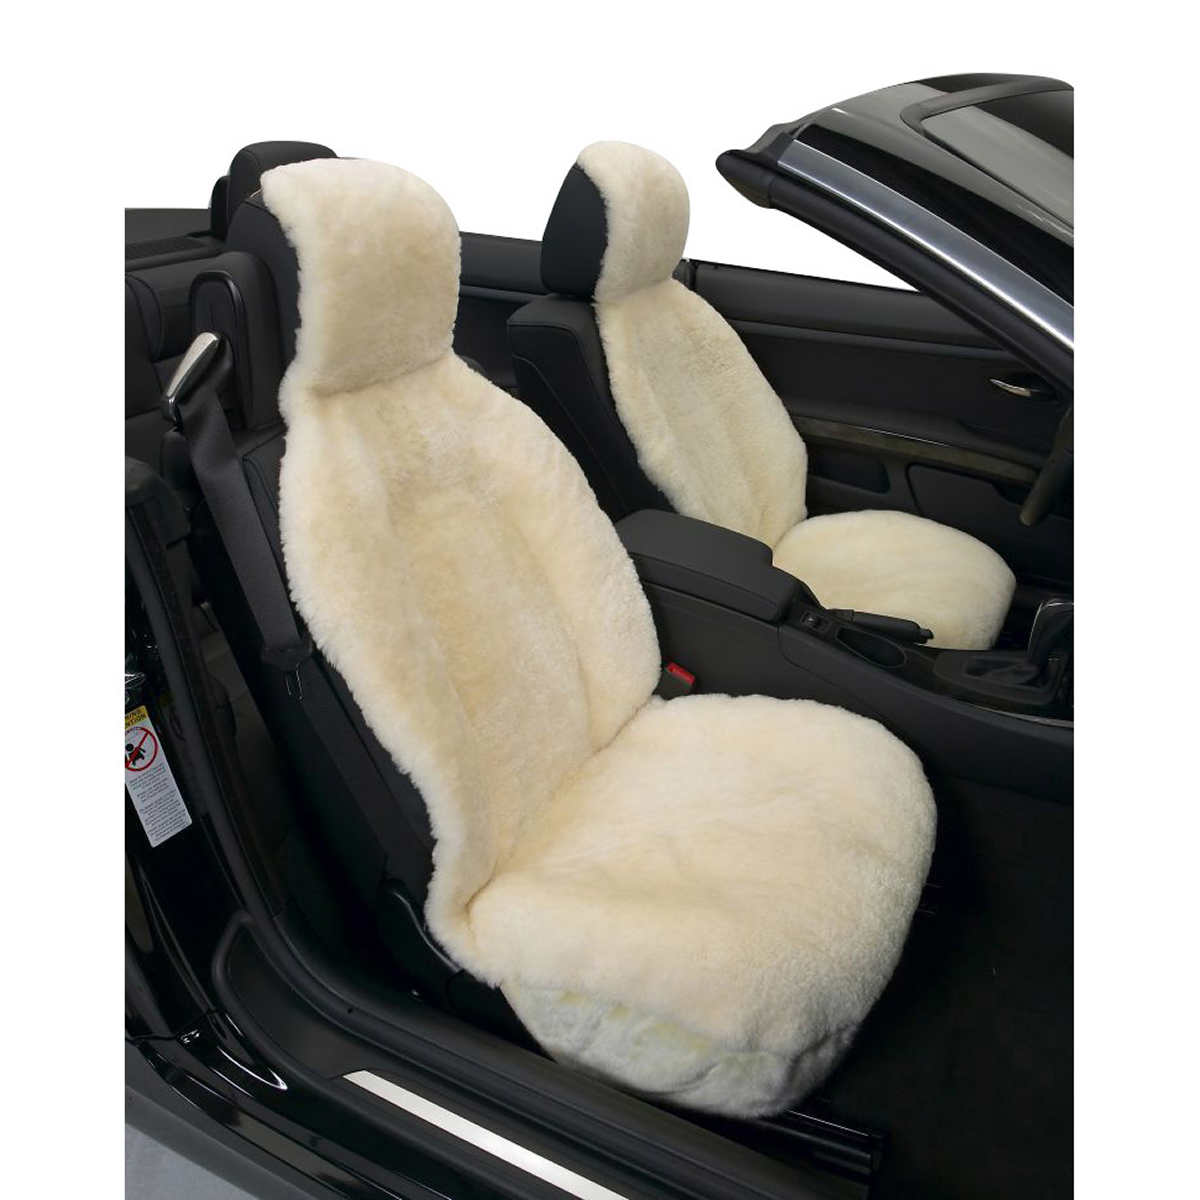 Car Seat Covers Direct - Leading supplier of custom car seat